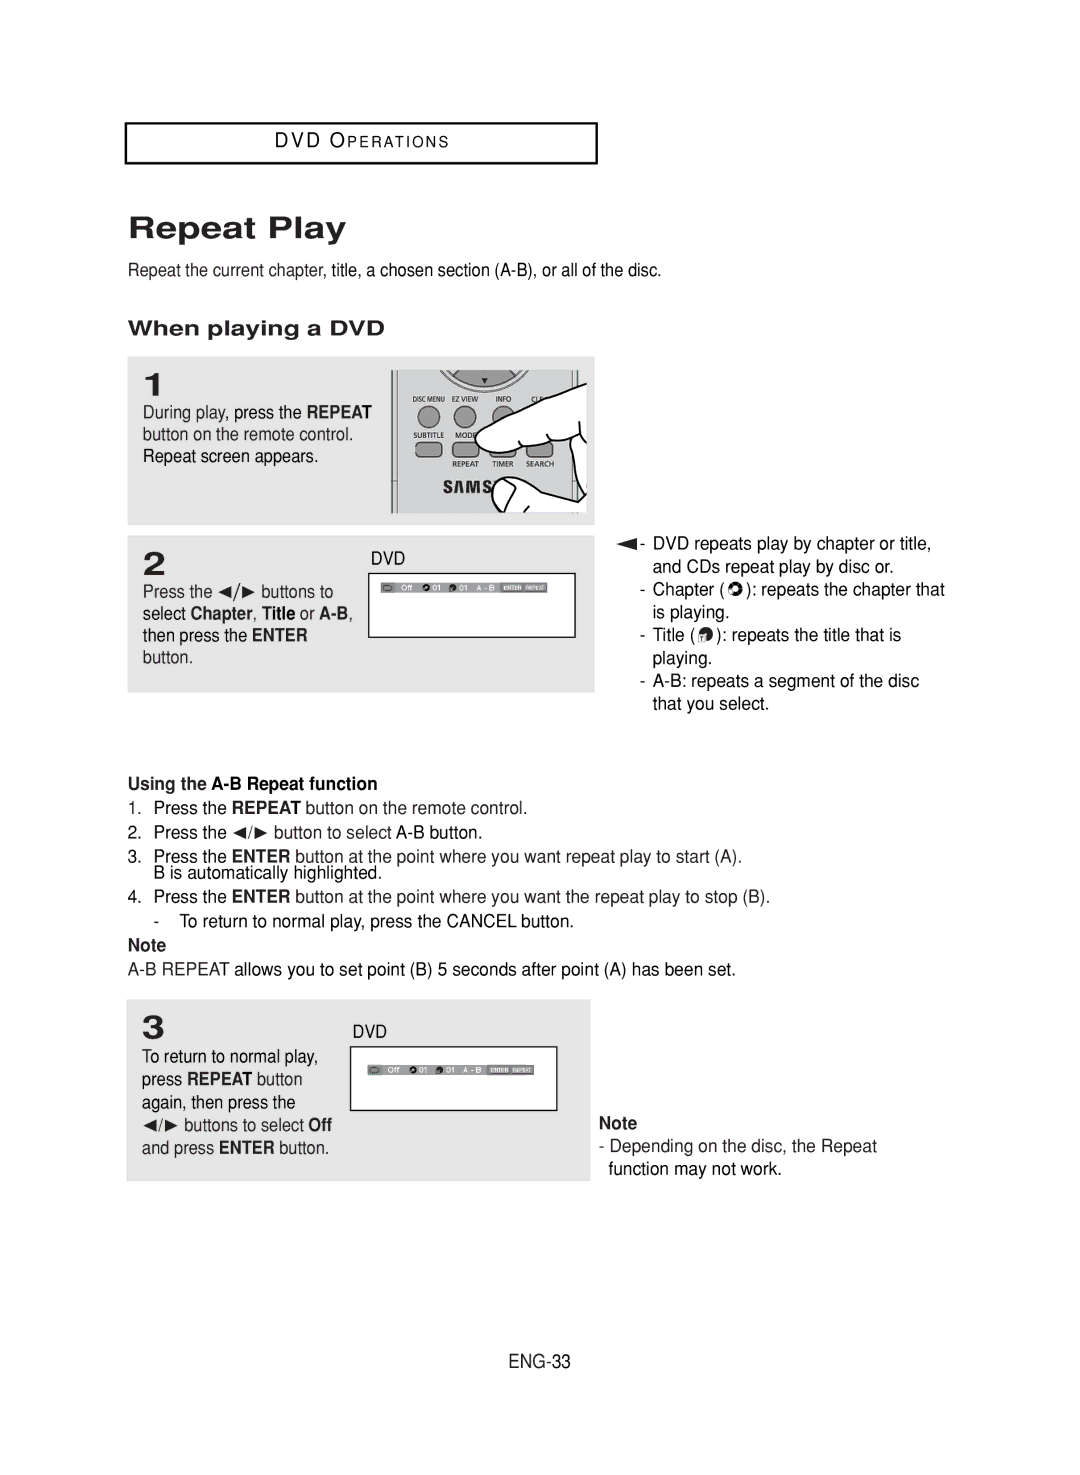 Samsung DVD-V9800 instruction manual Repeat Play, When playing a DVD, ENG-33, Using the A-B Repeat function 